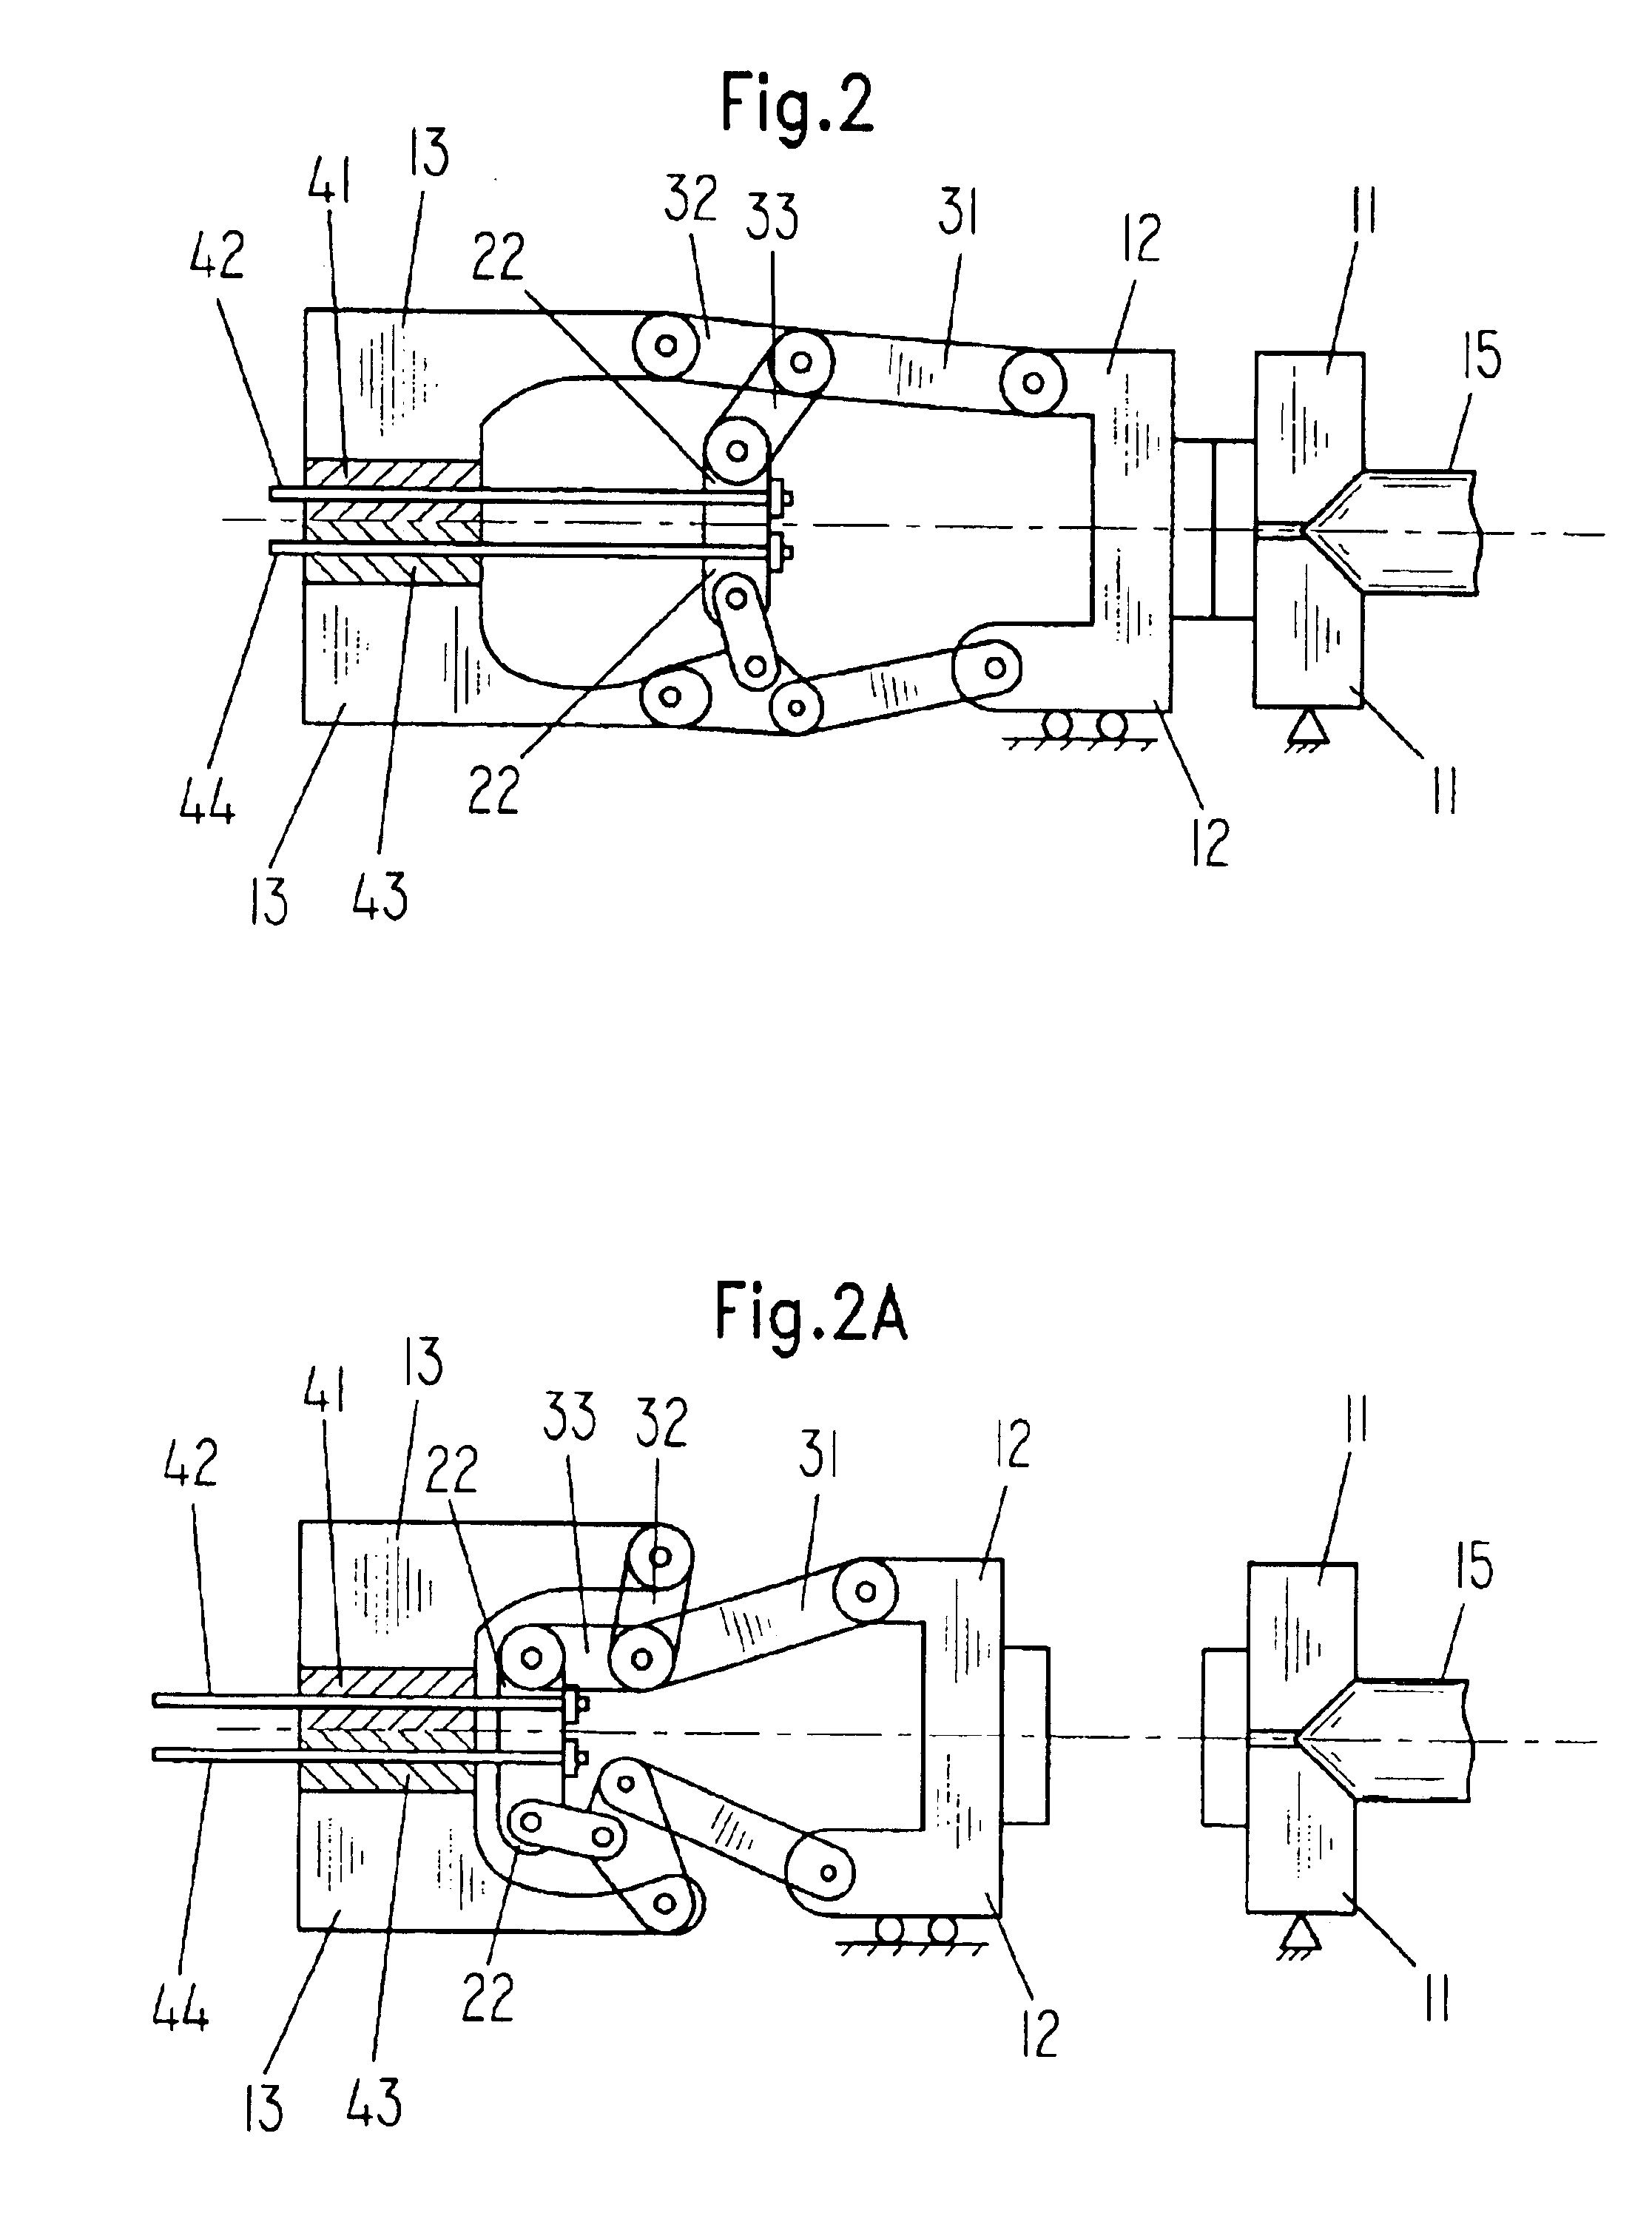 Injection molding machine with a linear motor